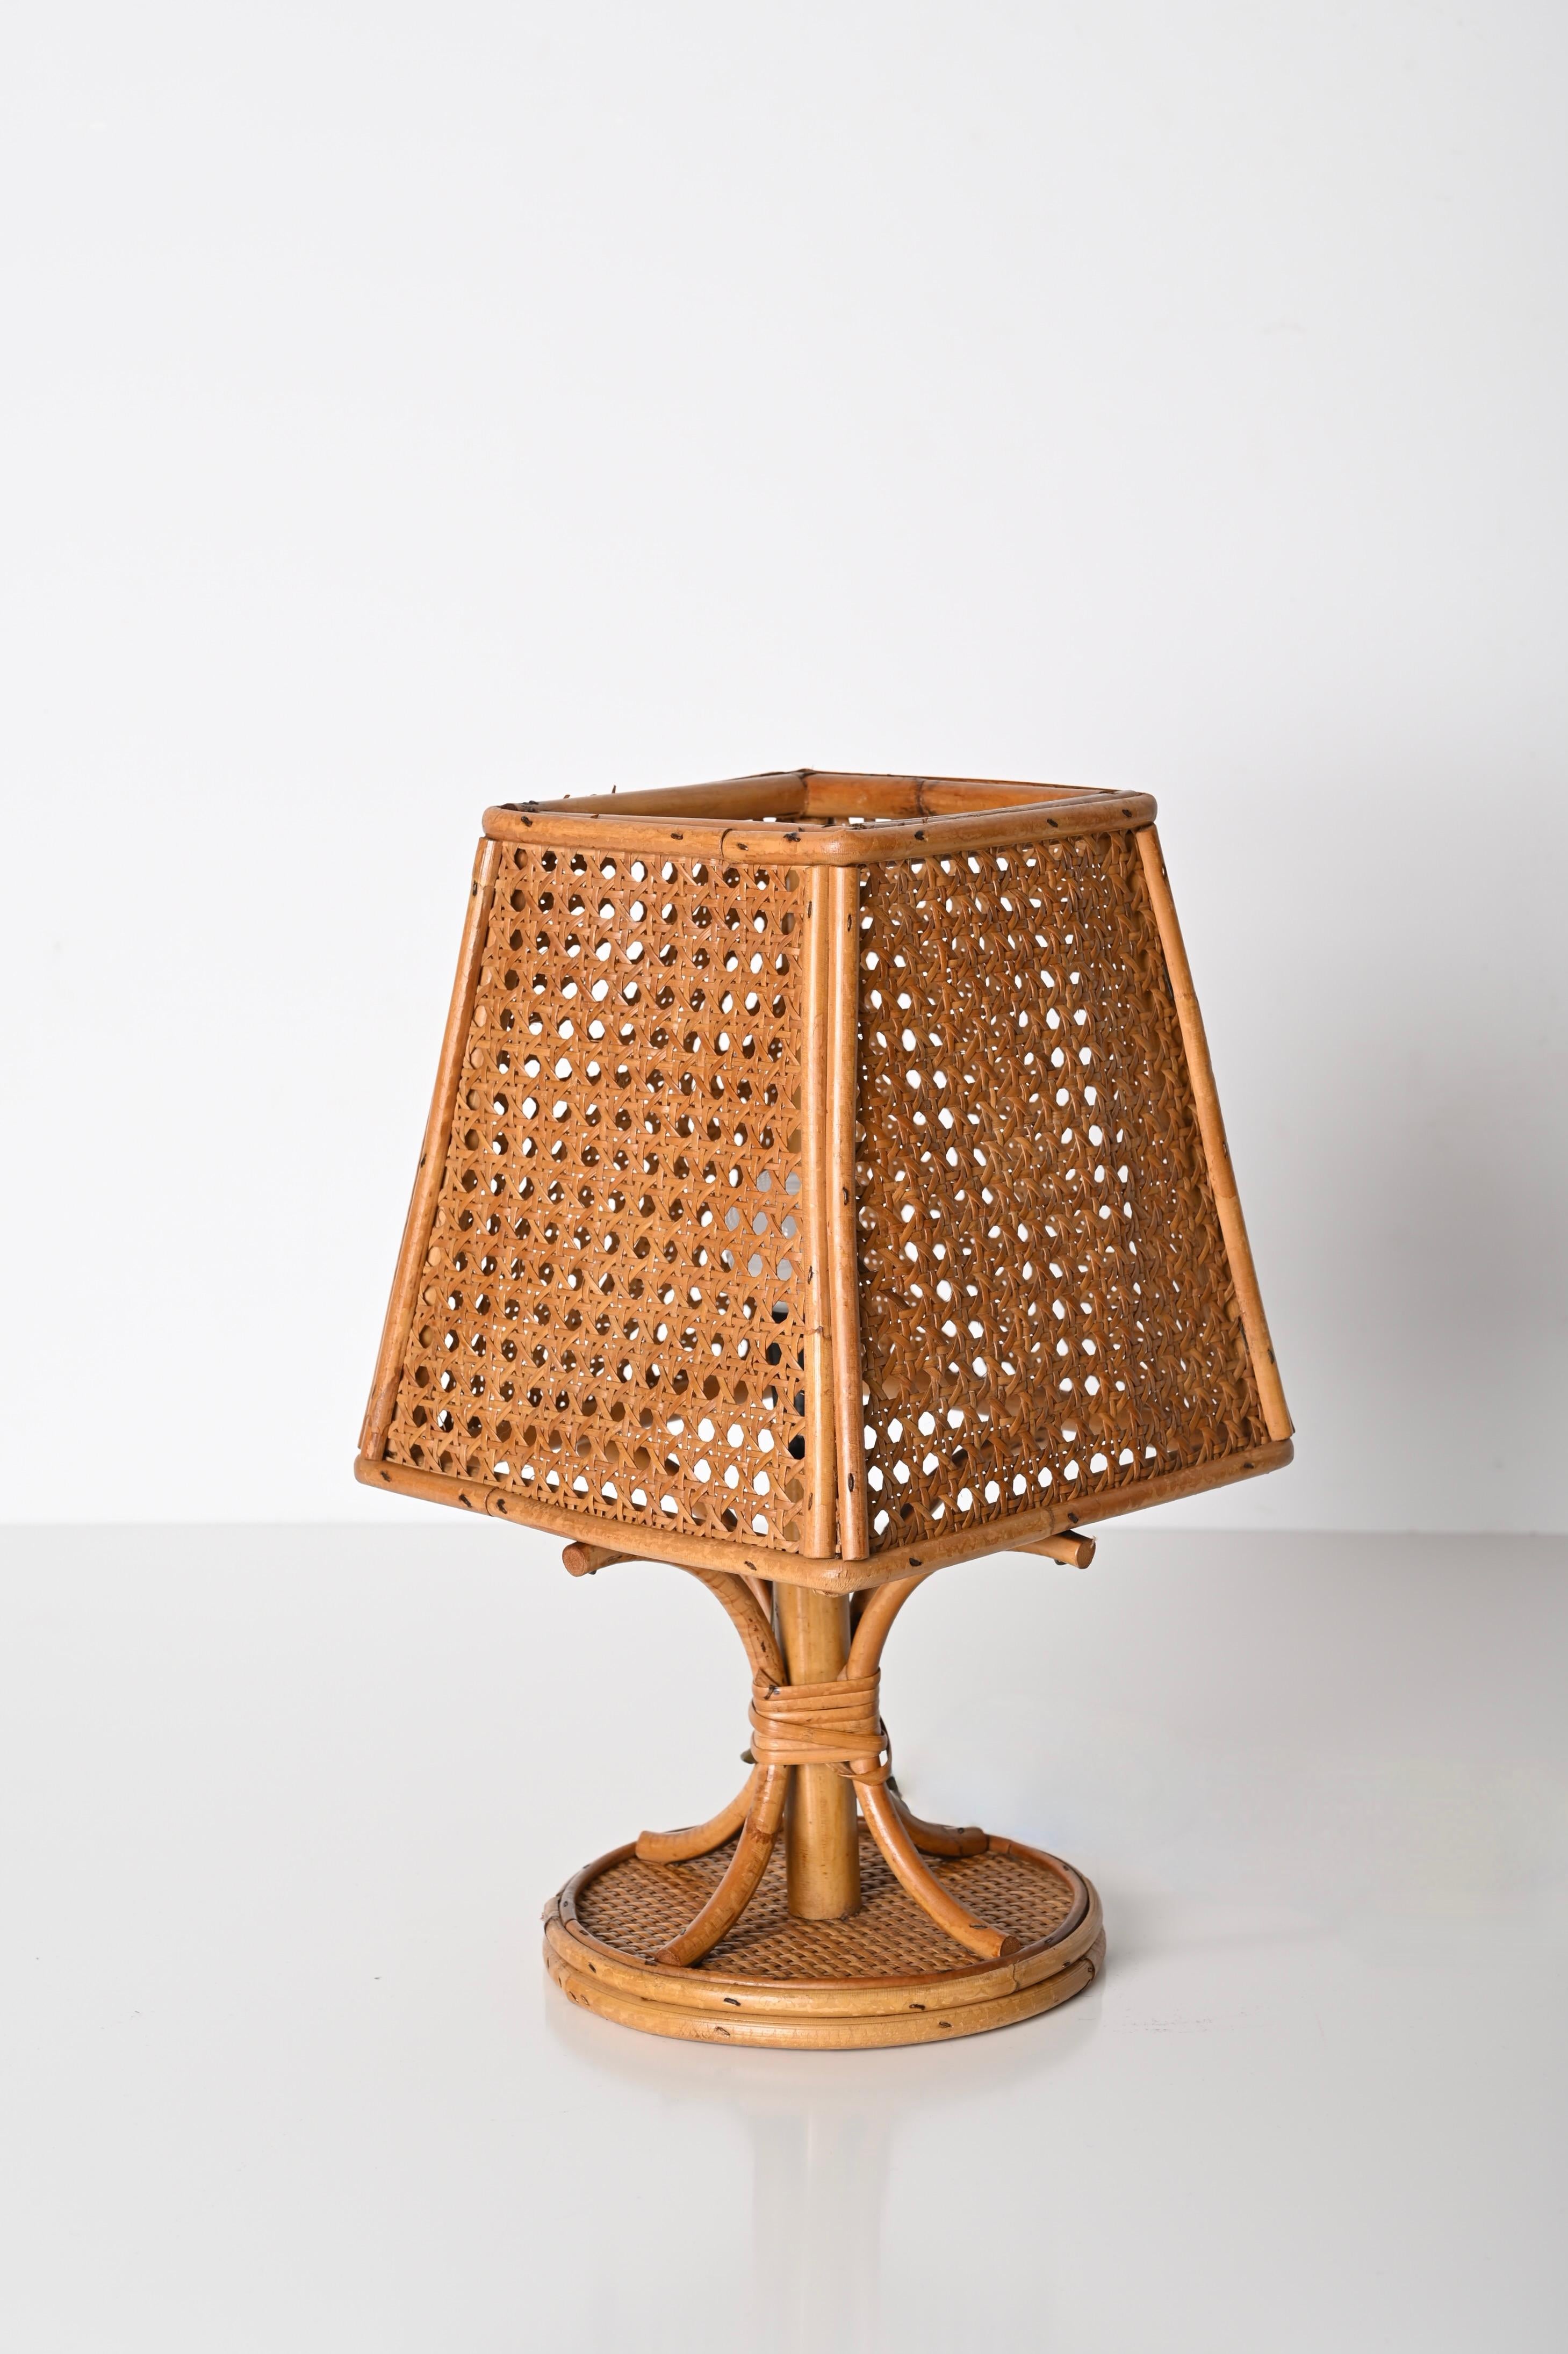 Pair of French Riviera Table Lamps in Wicker and Rattan, Italy 1960s For Sale 4